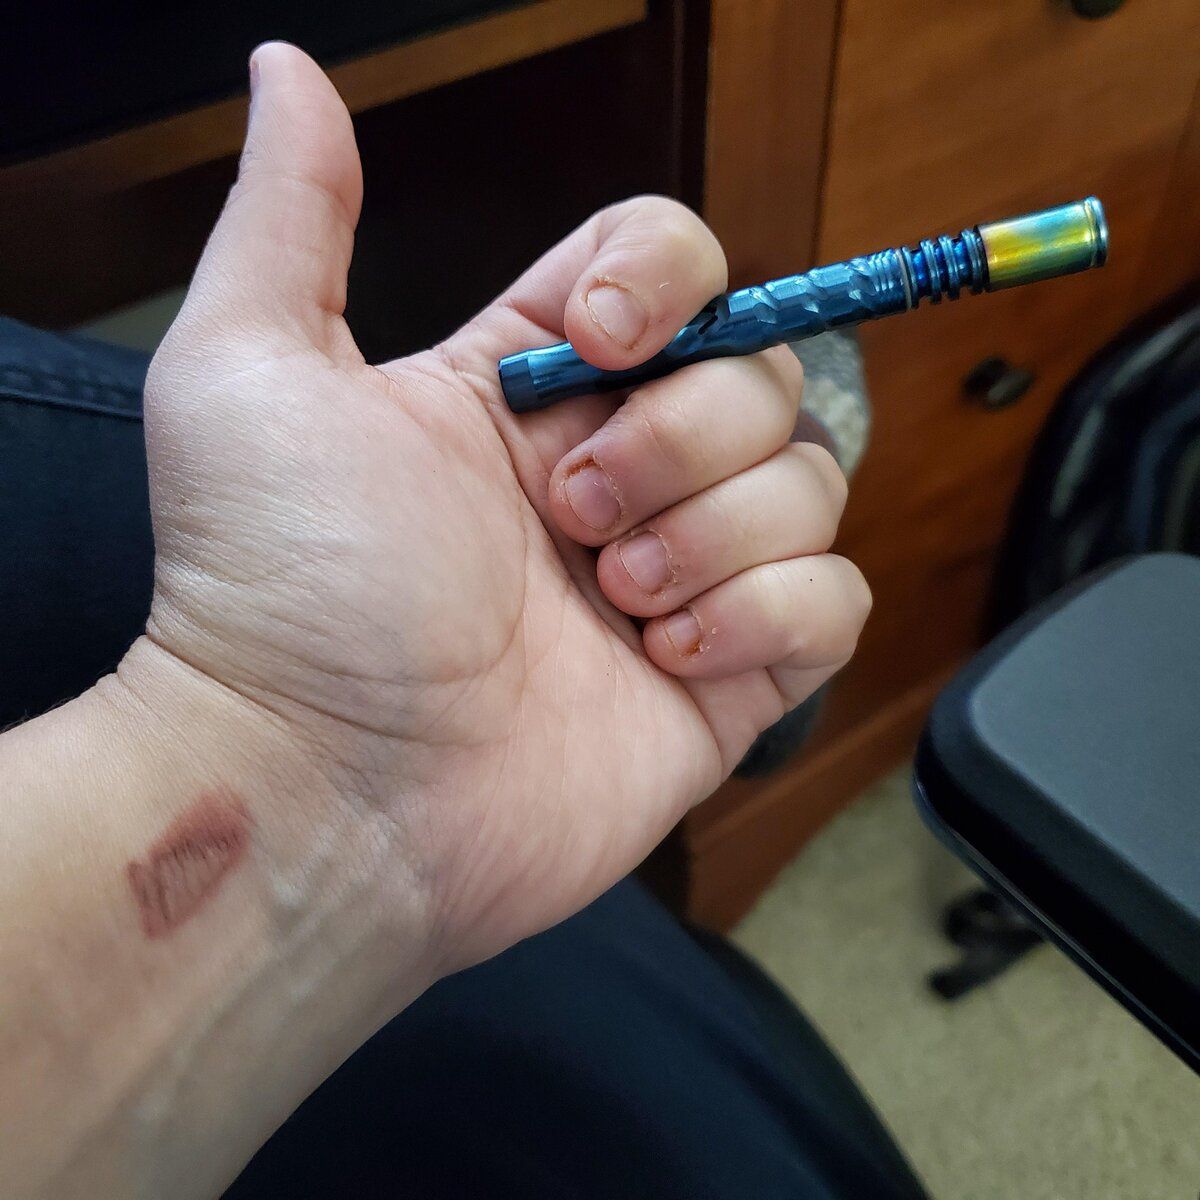 khov93-Instinctually_tried_to_catch_my_dynavap_when_I_fell._Got_branded._Welcome_to_the_dynave...jpg